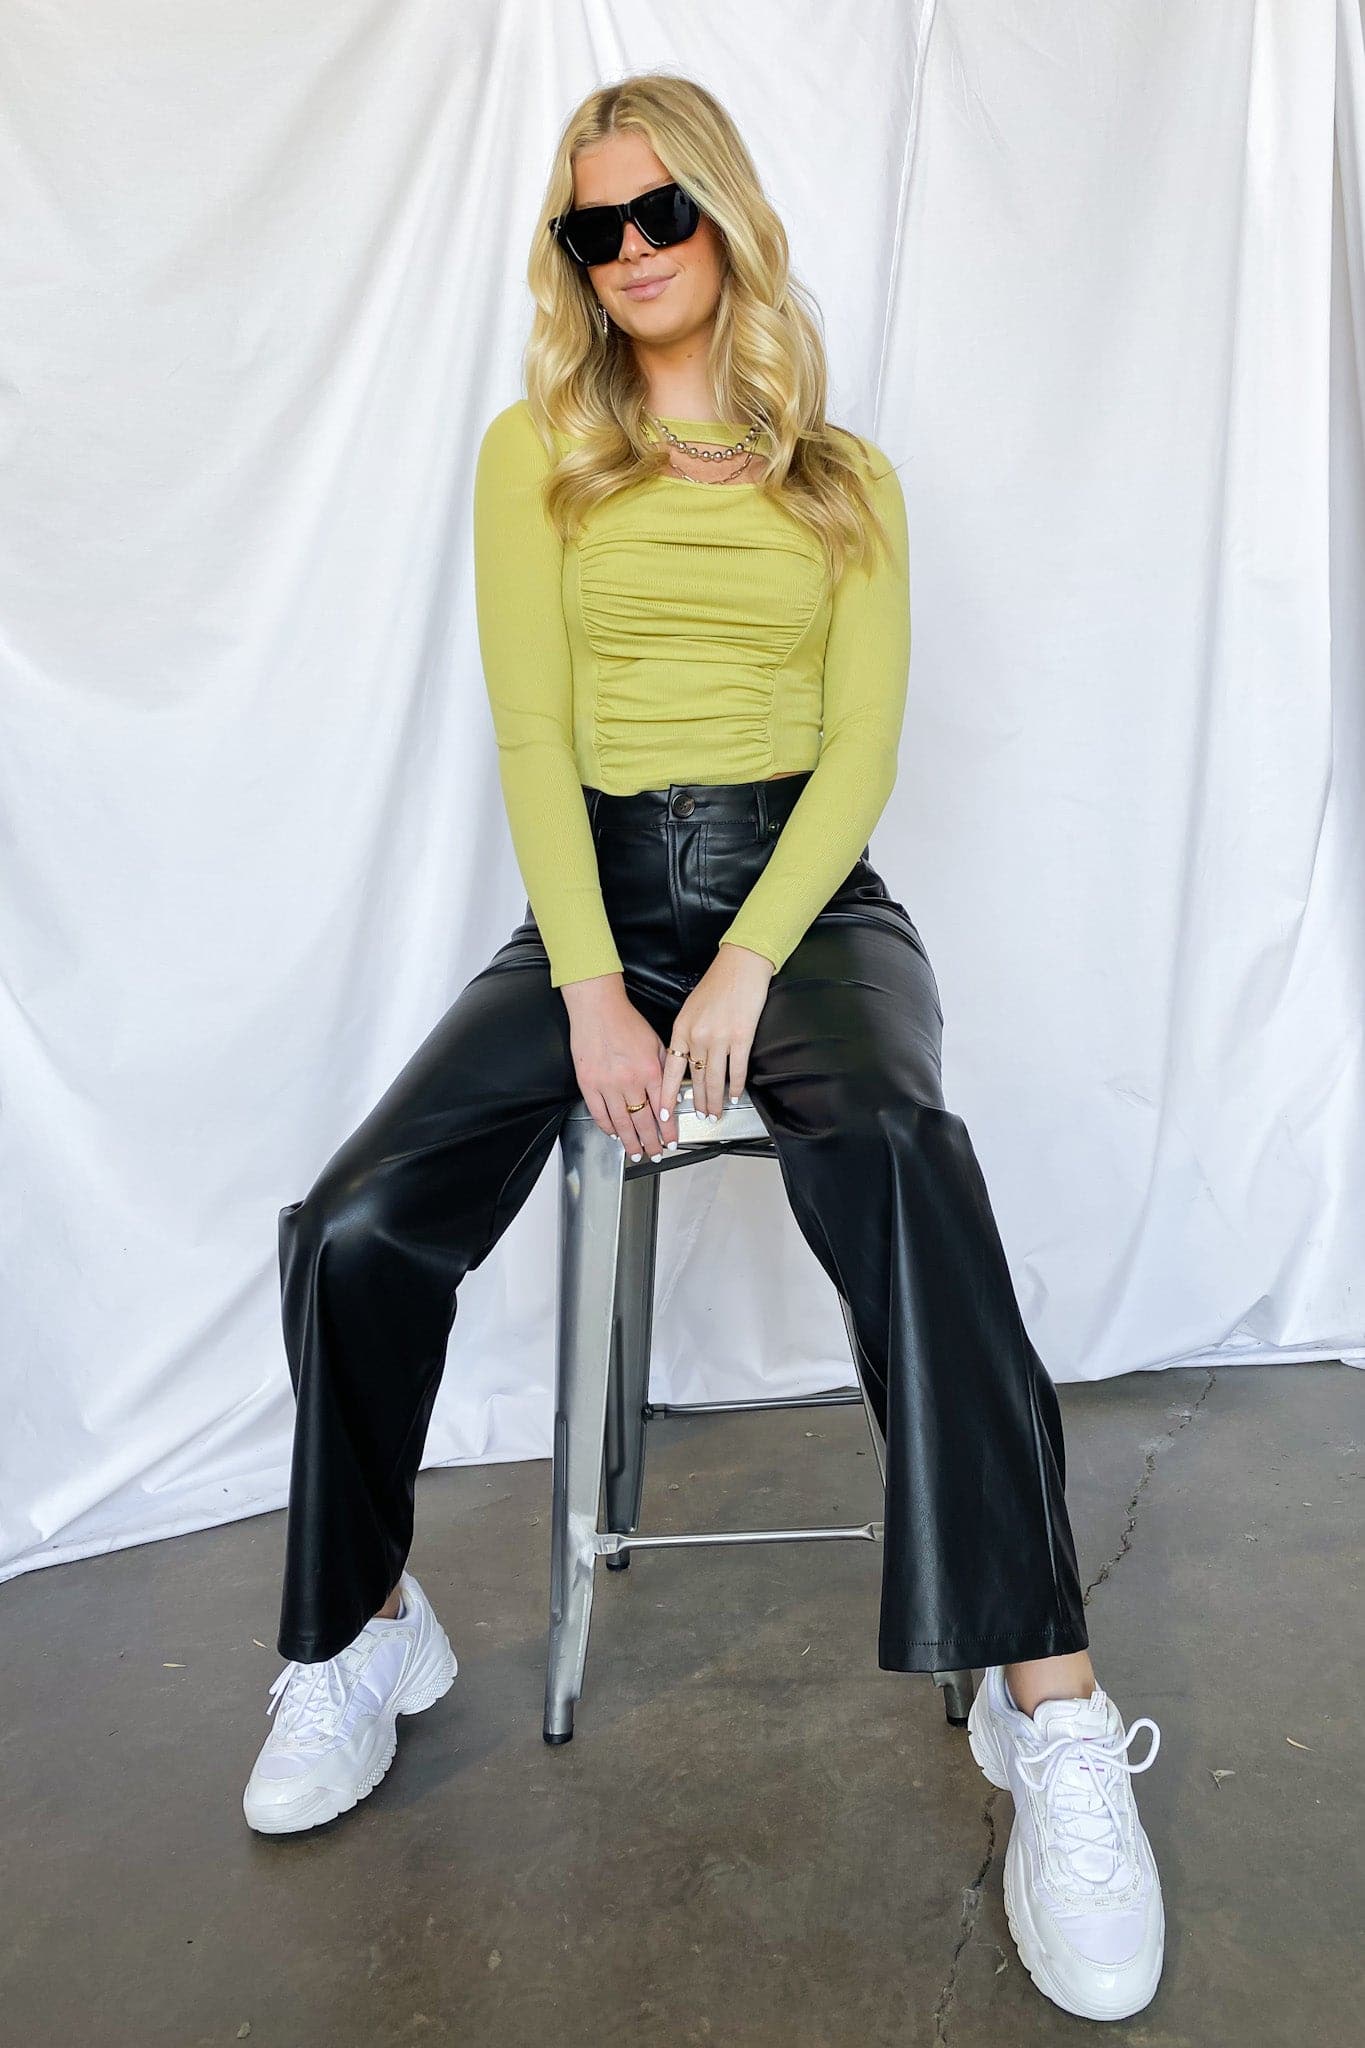  Sleek Style Wide Leg Faux Leather Pants - FINAL SALE - Madison and Mallory